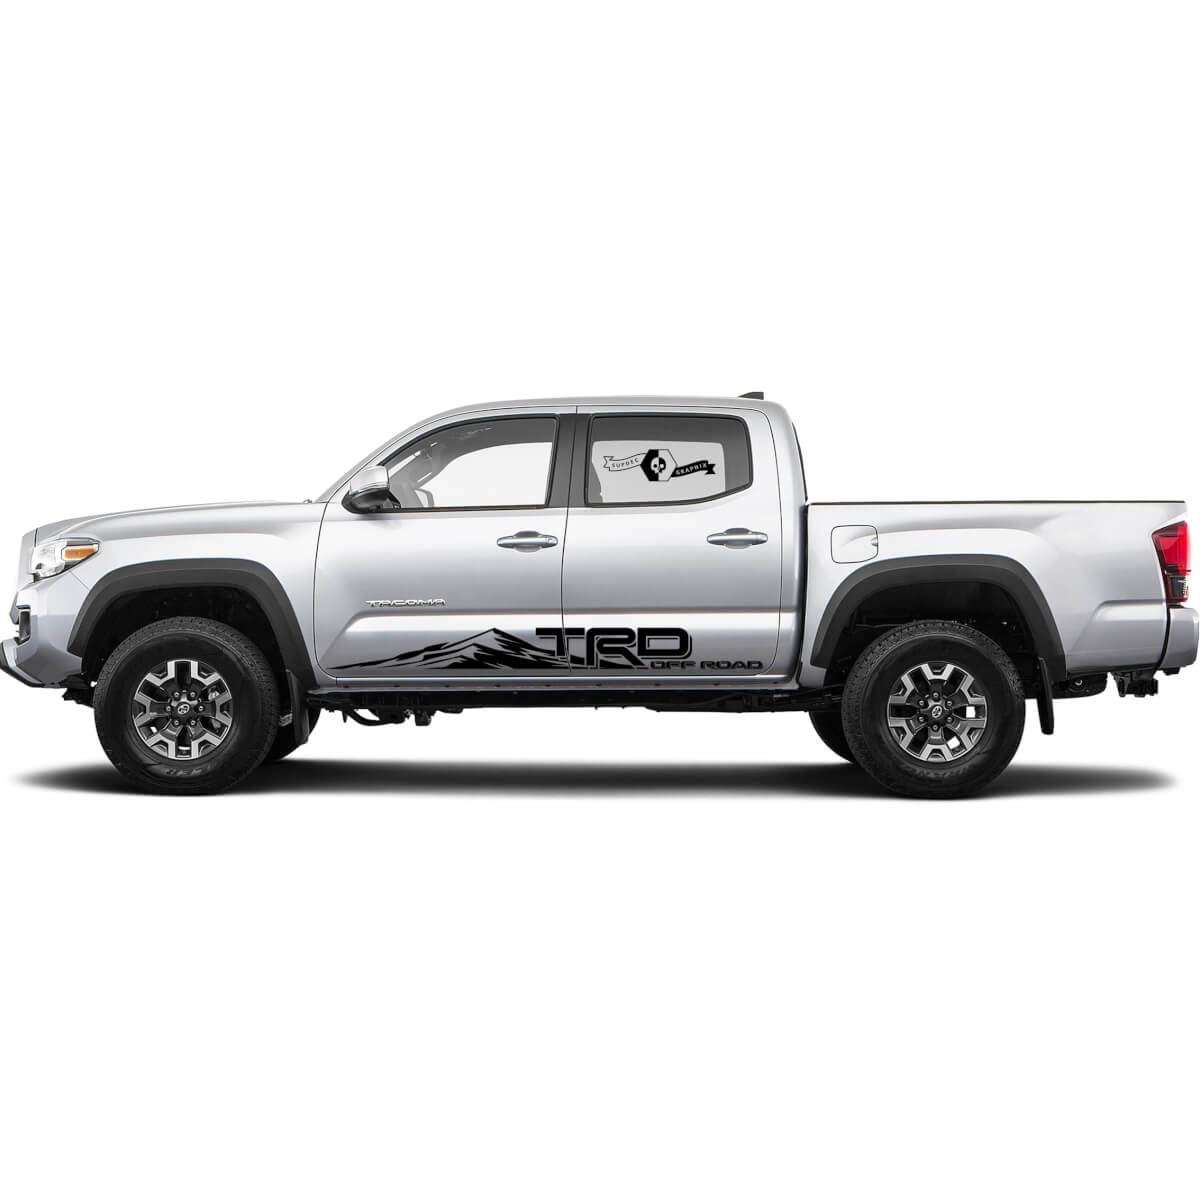 TRD off road Mountains Style for Side Rocker Panel Truck Decals Stickers for Tacoma Tundra Hilux 4Runner 6